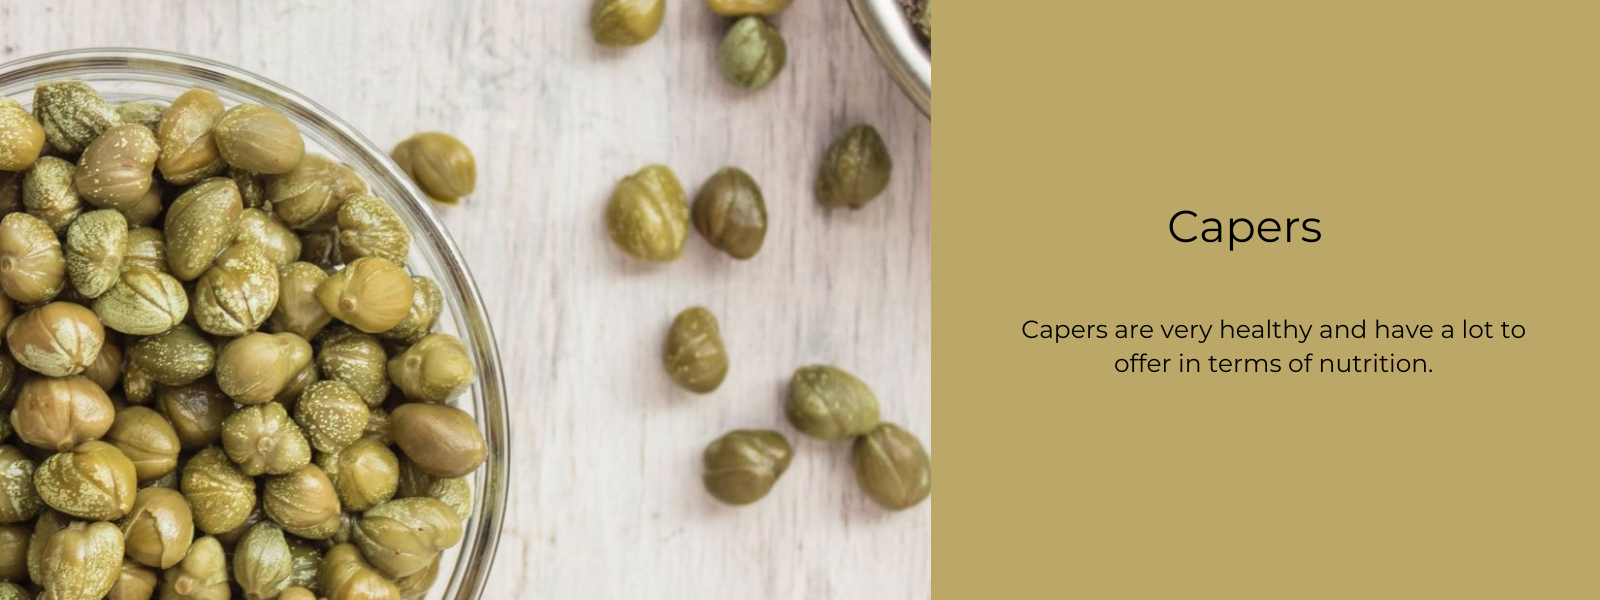 Capers - Health Benefits, Uses and Important Facts